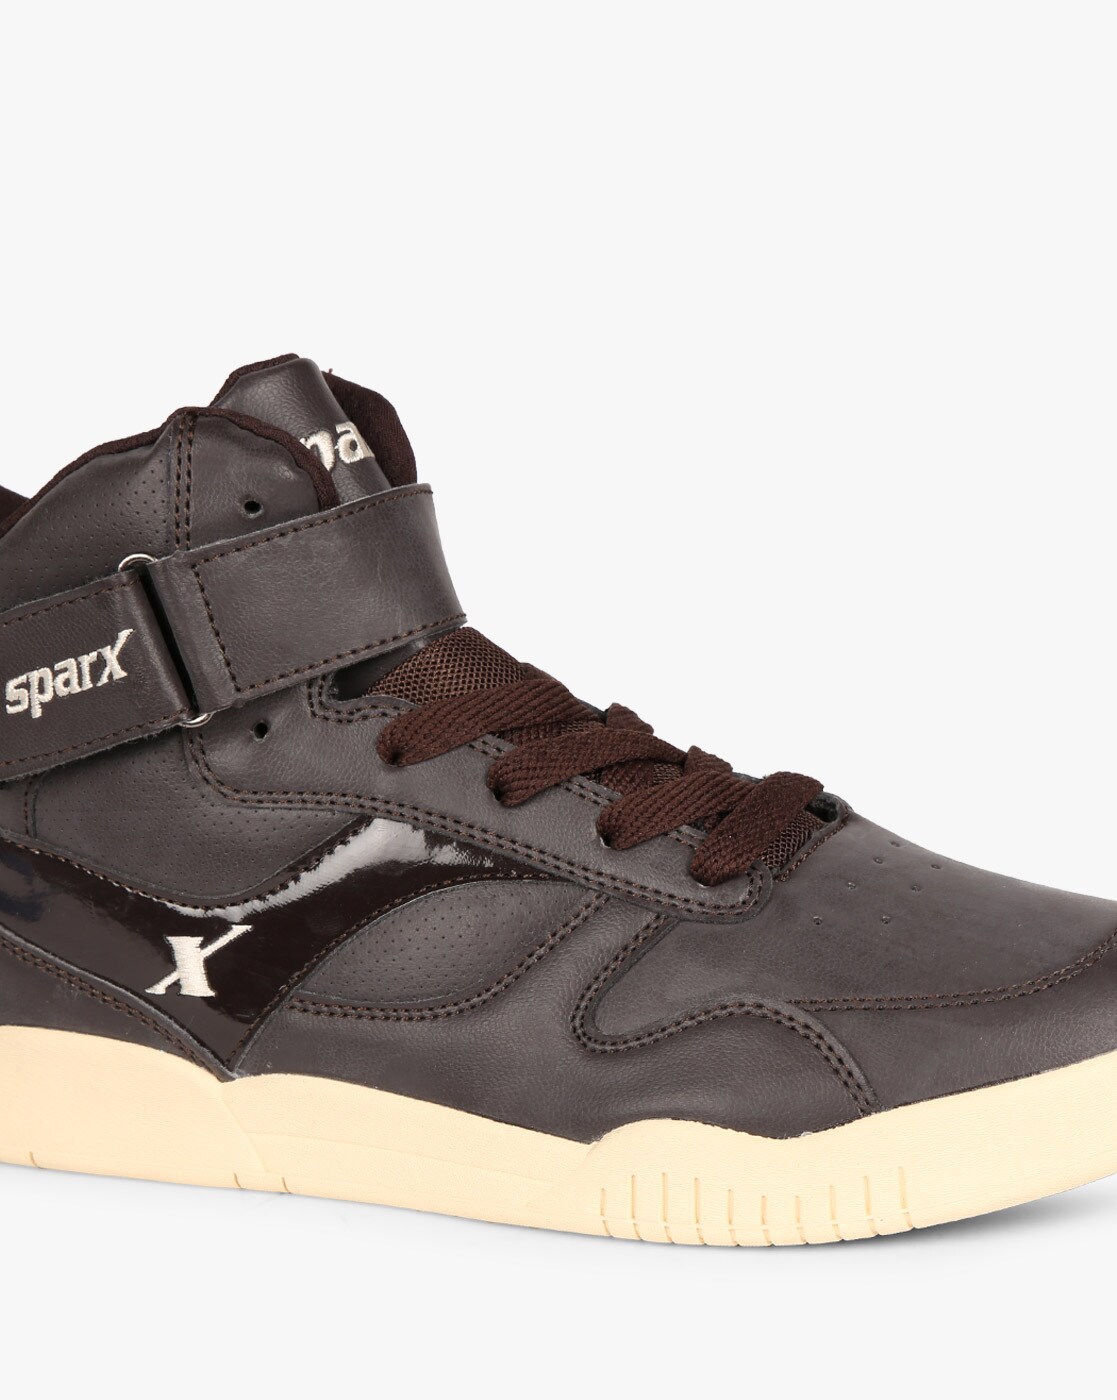 sparx high neck shoes